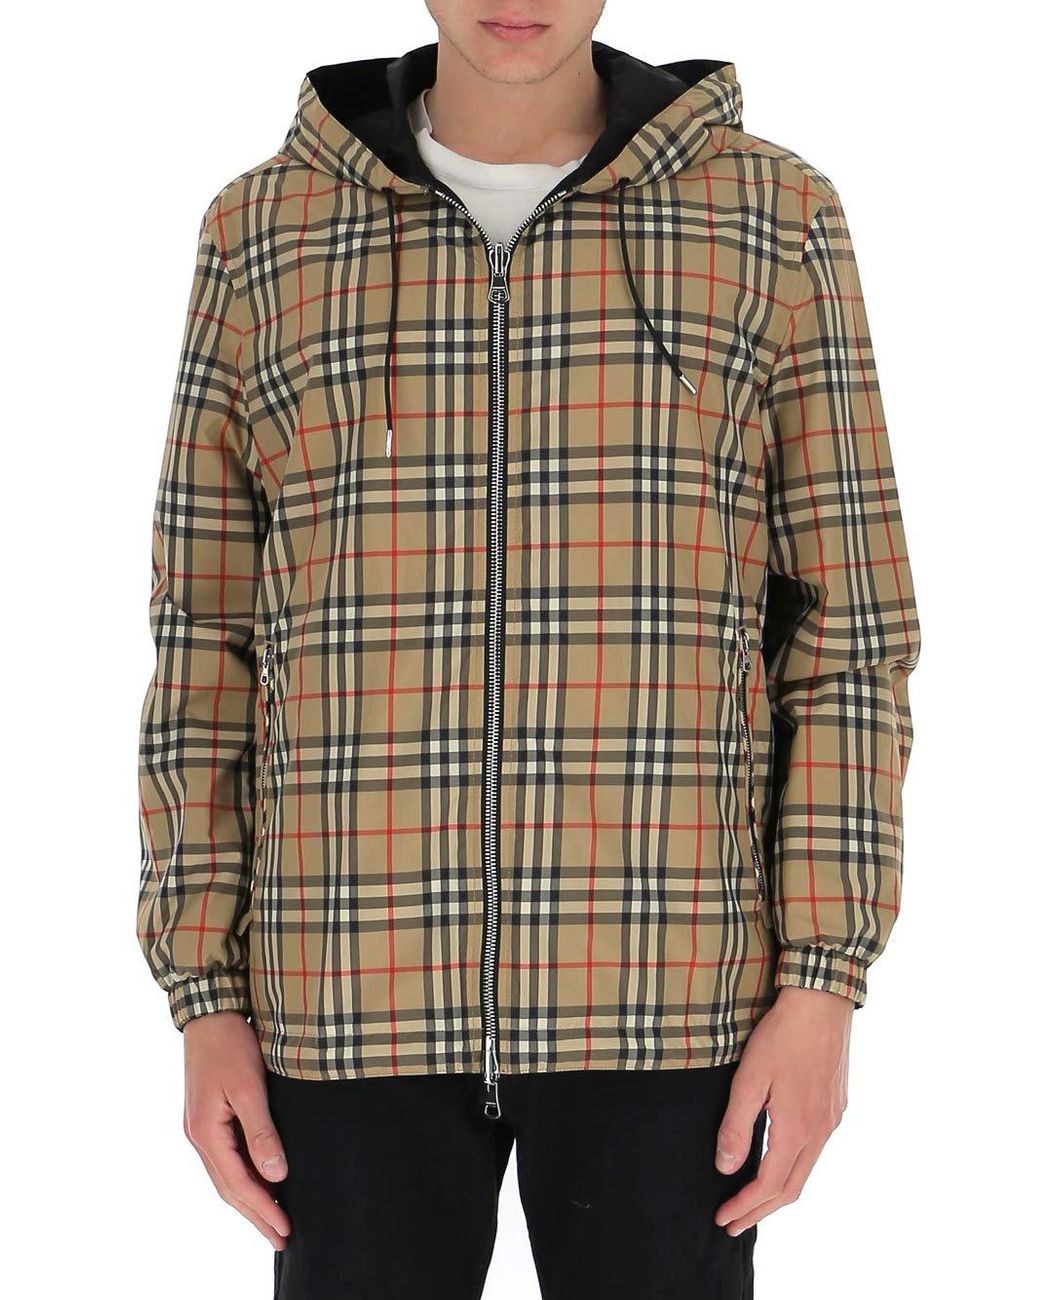 Burberry Synthetic Reversible Vintage Check Jacket for Men - Lyst